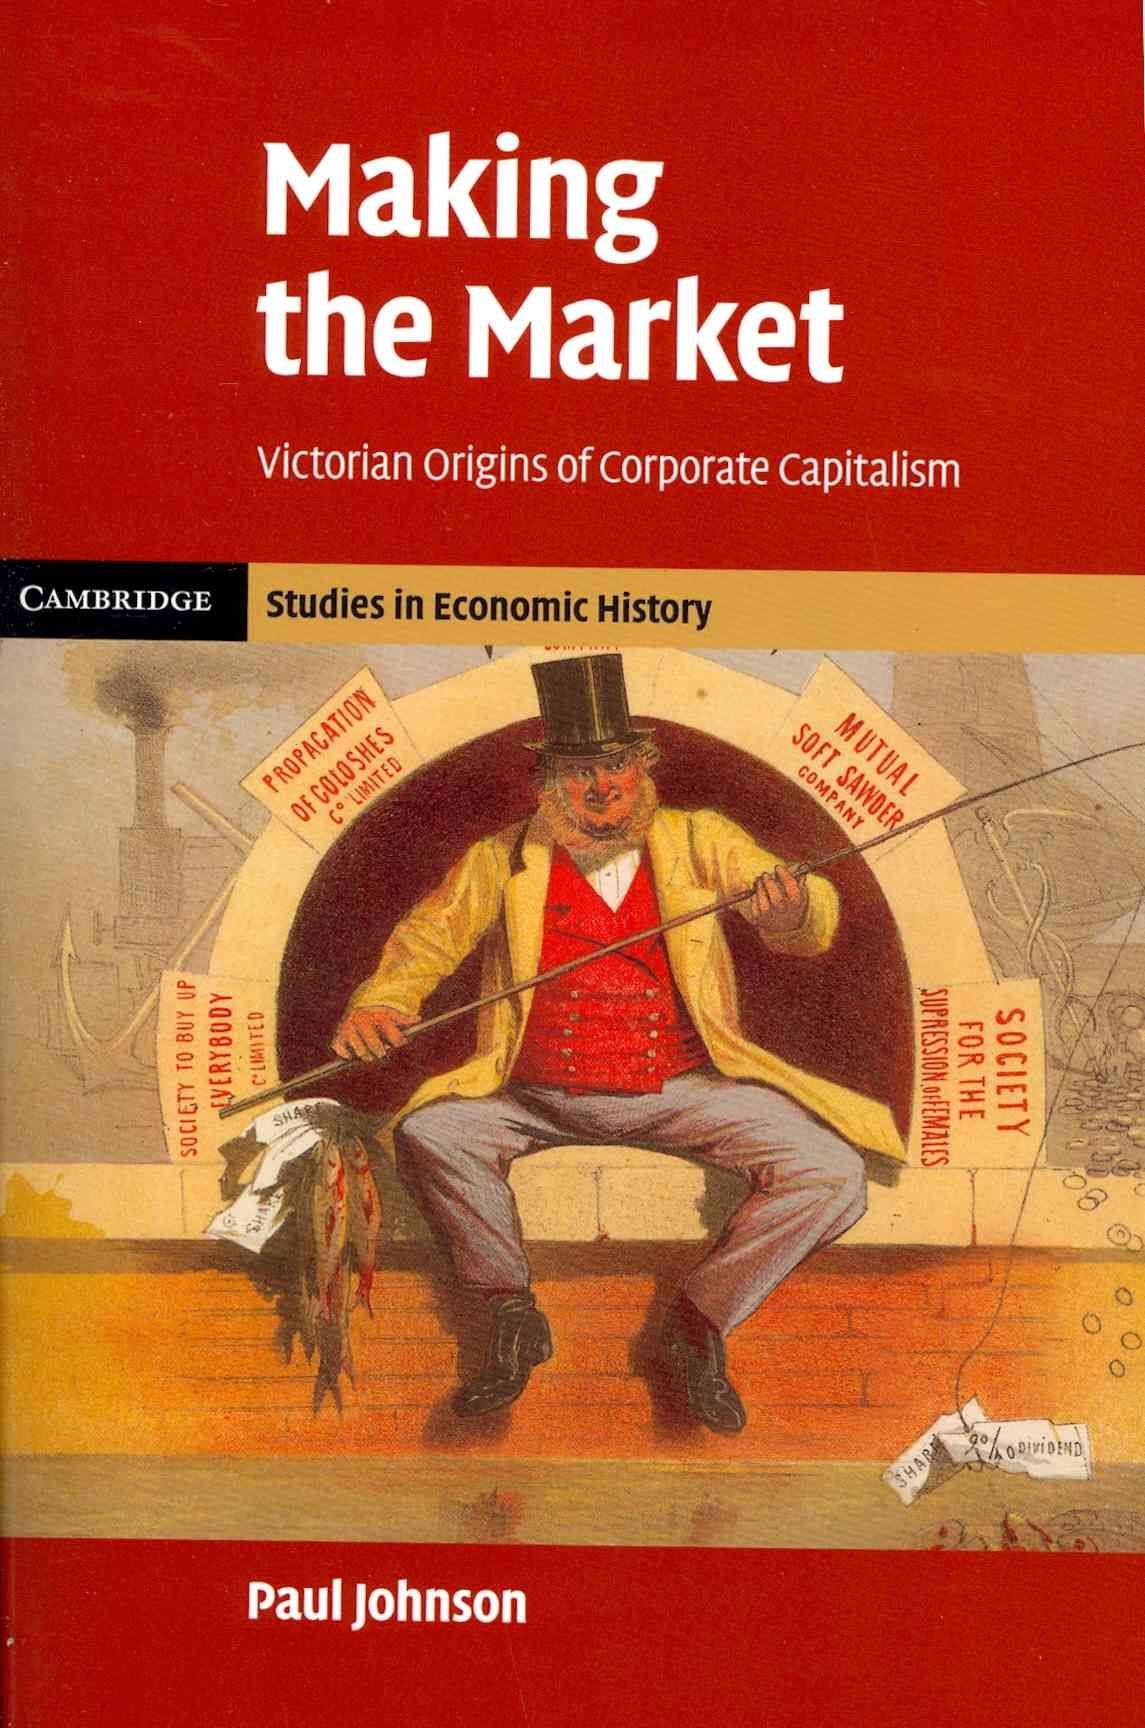 Making the Market